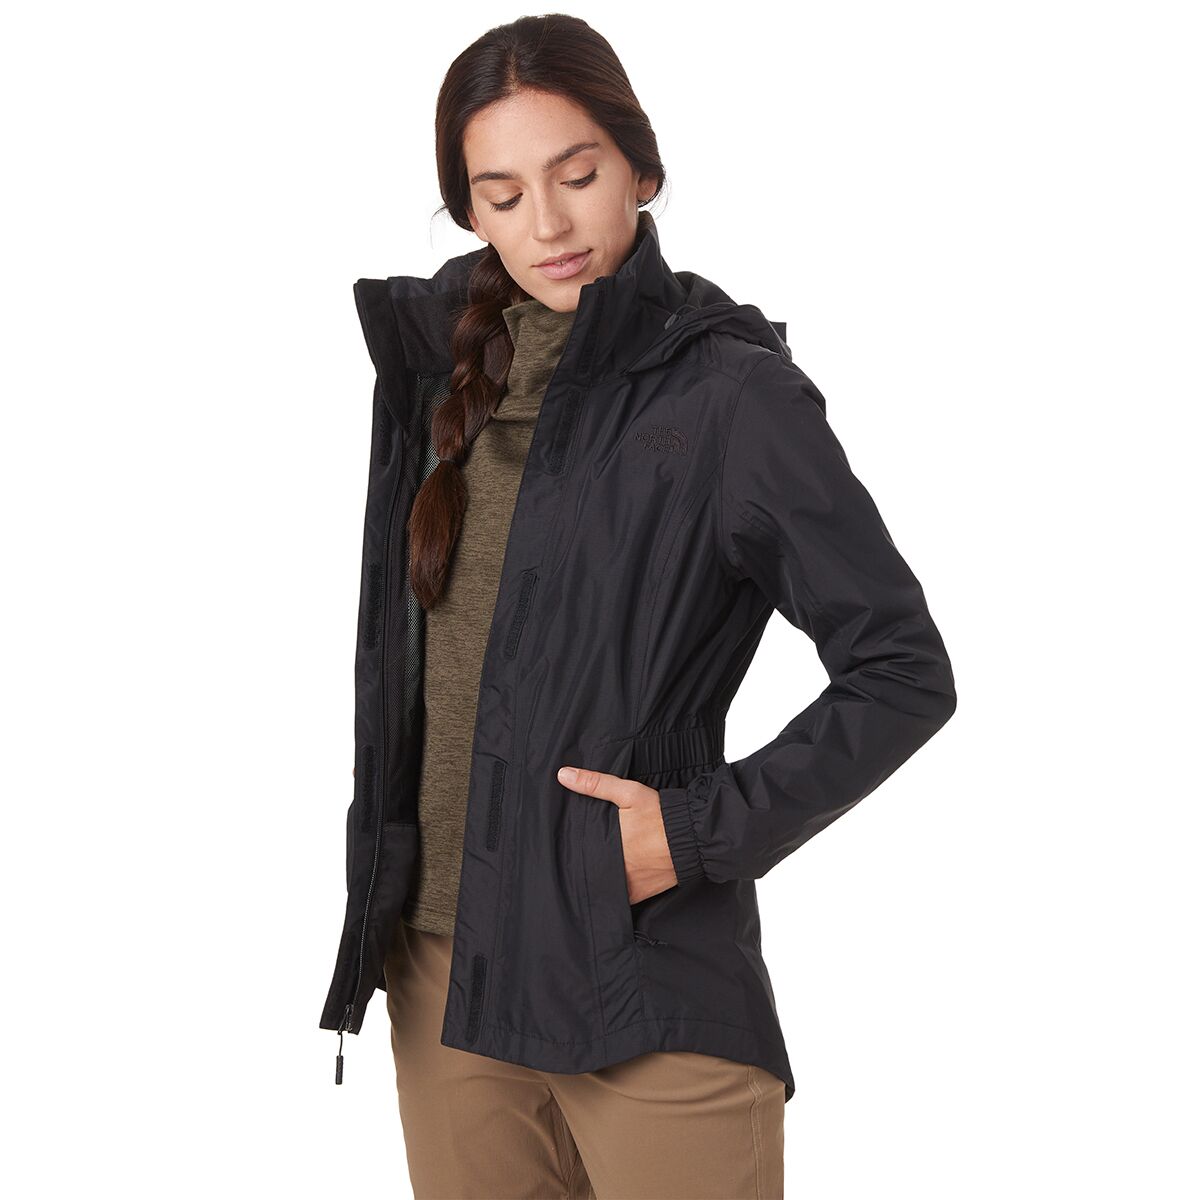 The North Face Resolve II Parka - Women's | Backcountry.com